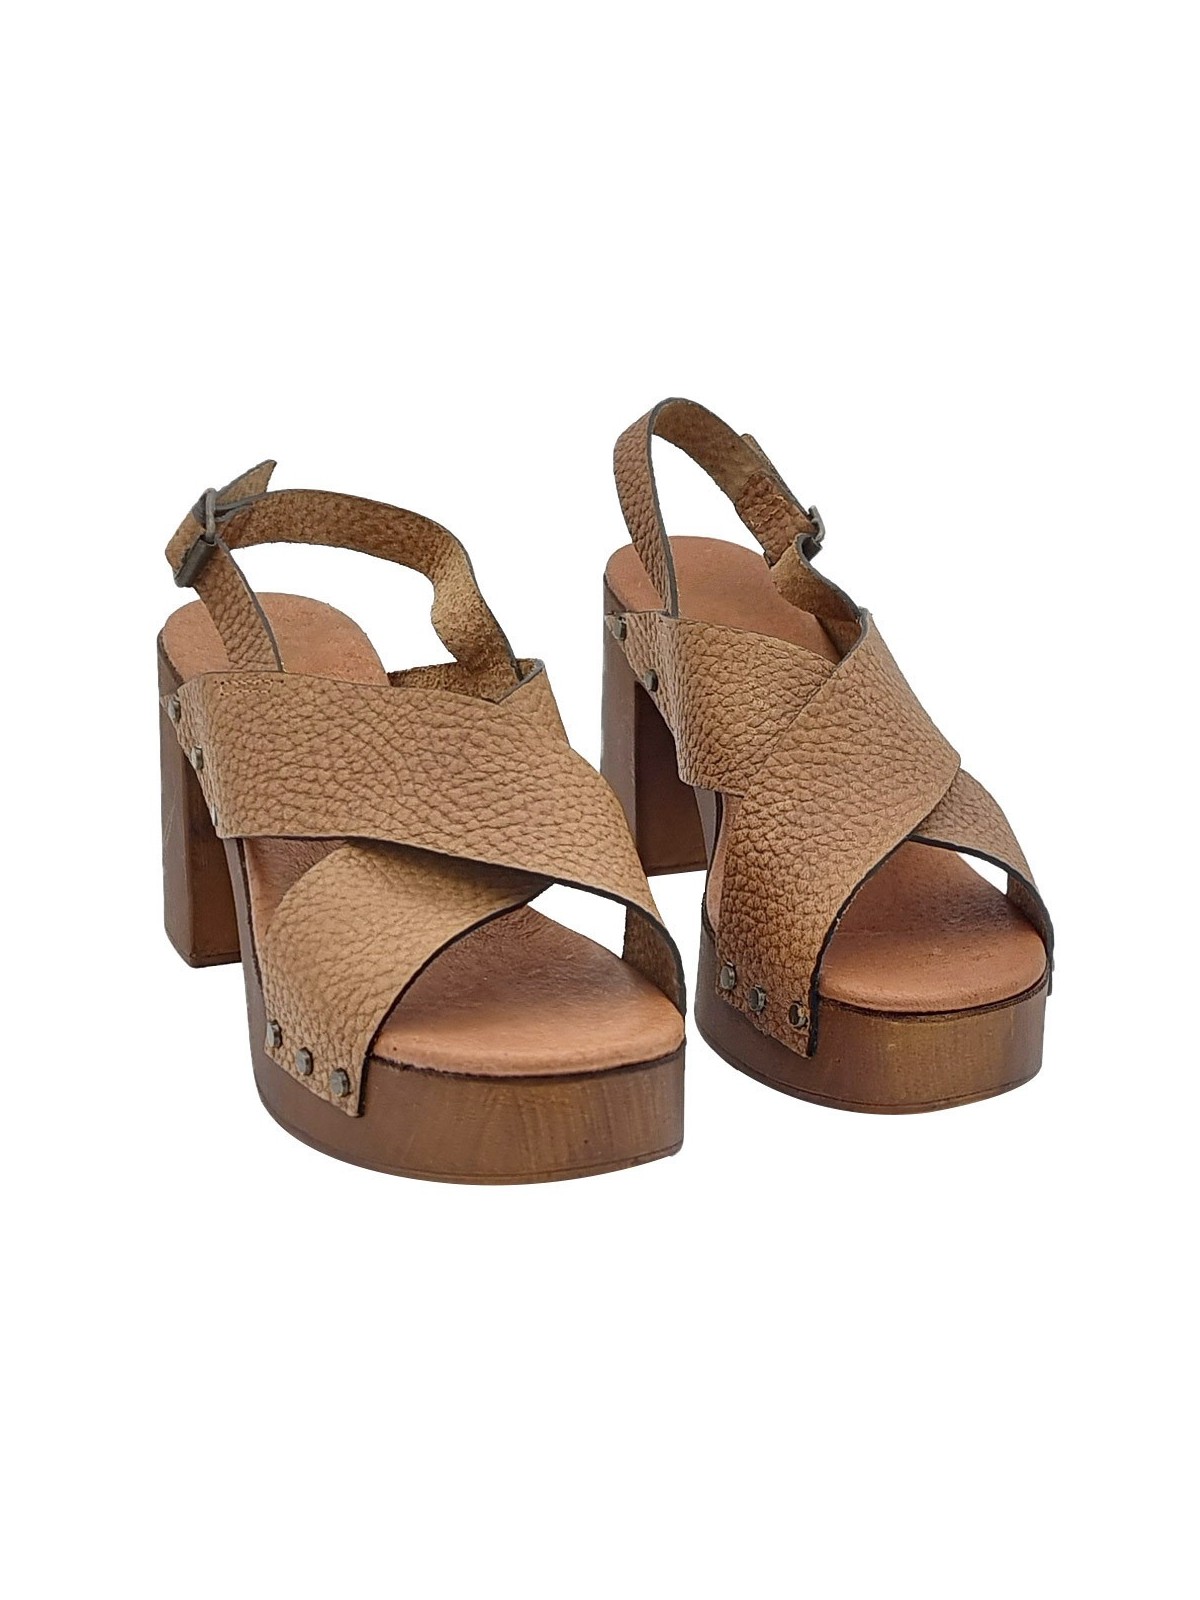 OCHER SANDALS WITH CROSSED BANDS AND COMFORTABLE HEEL